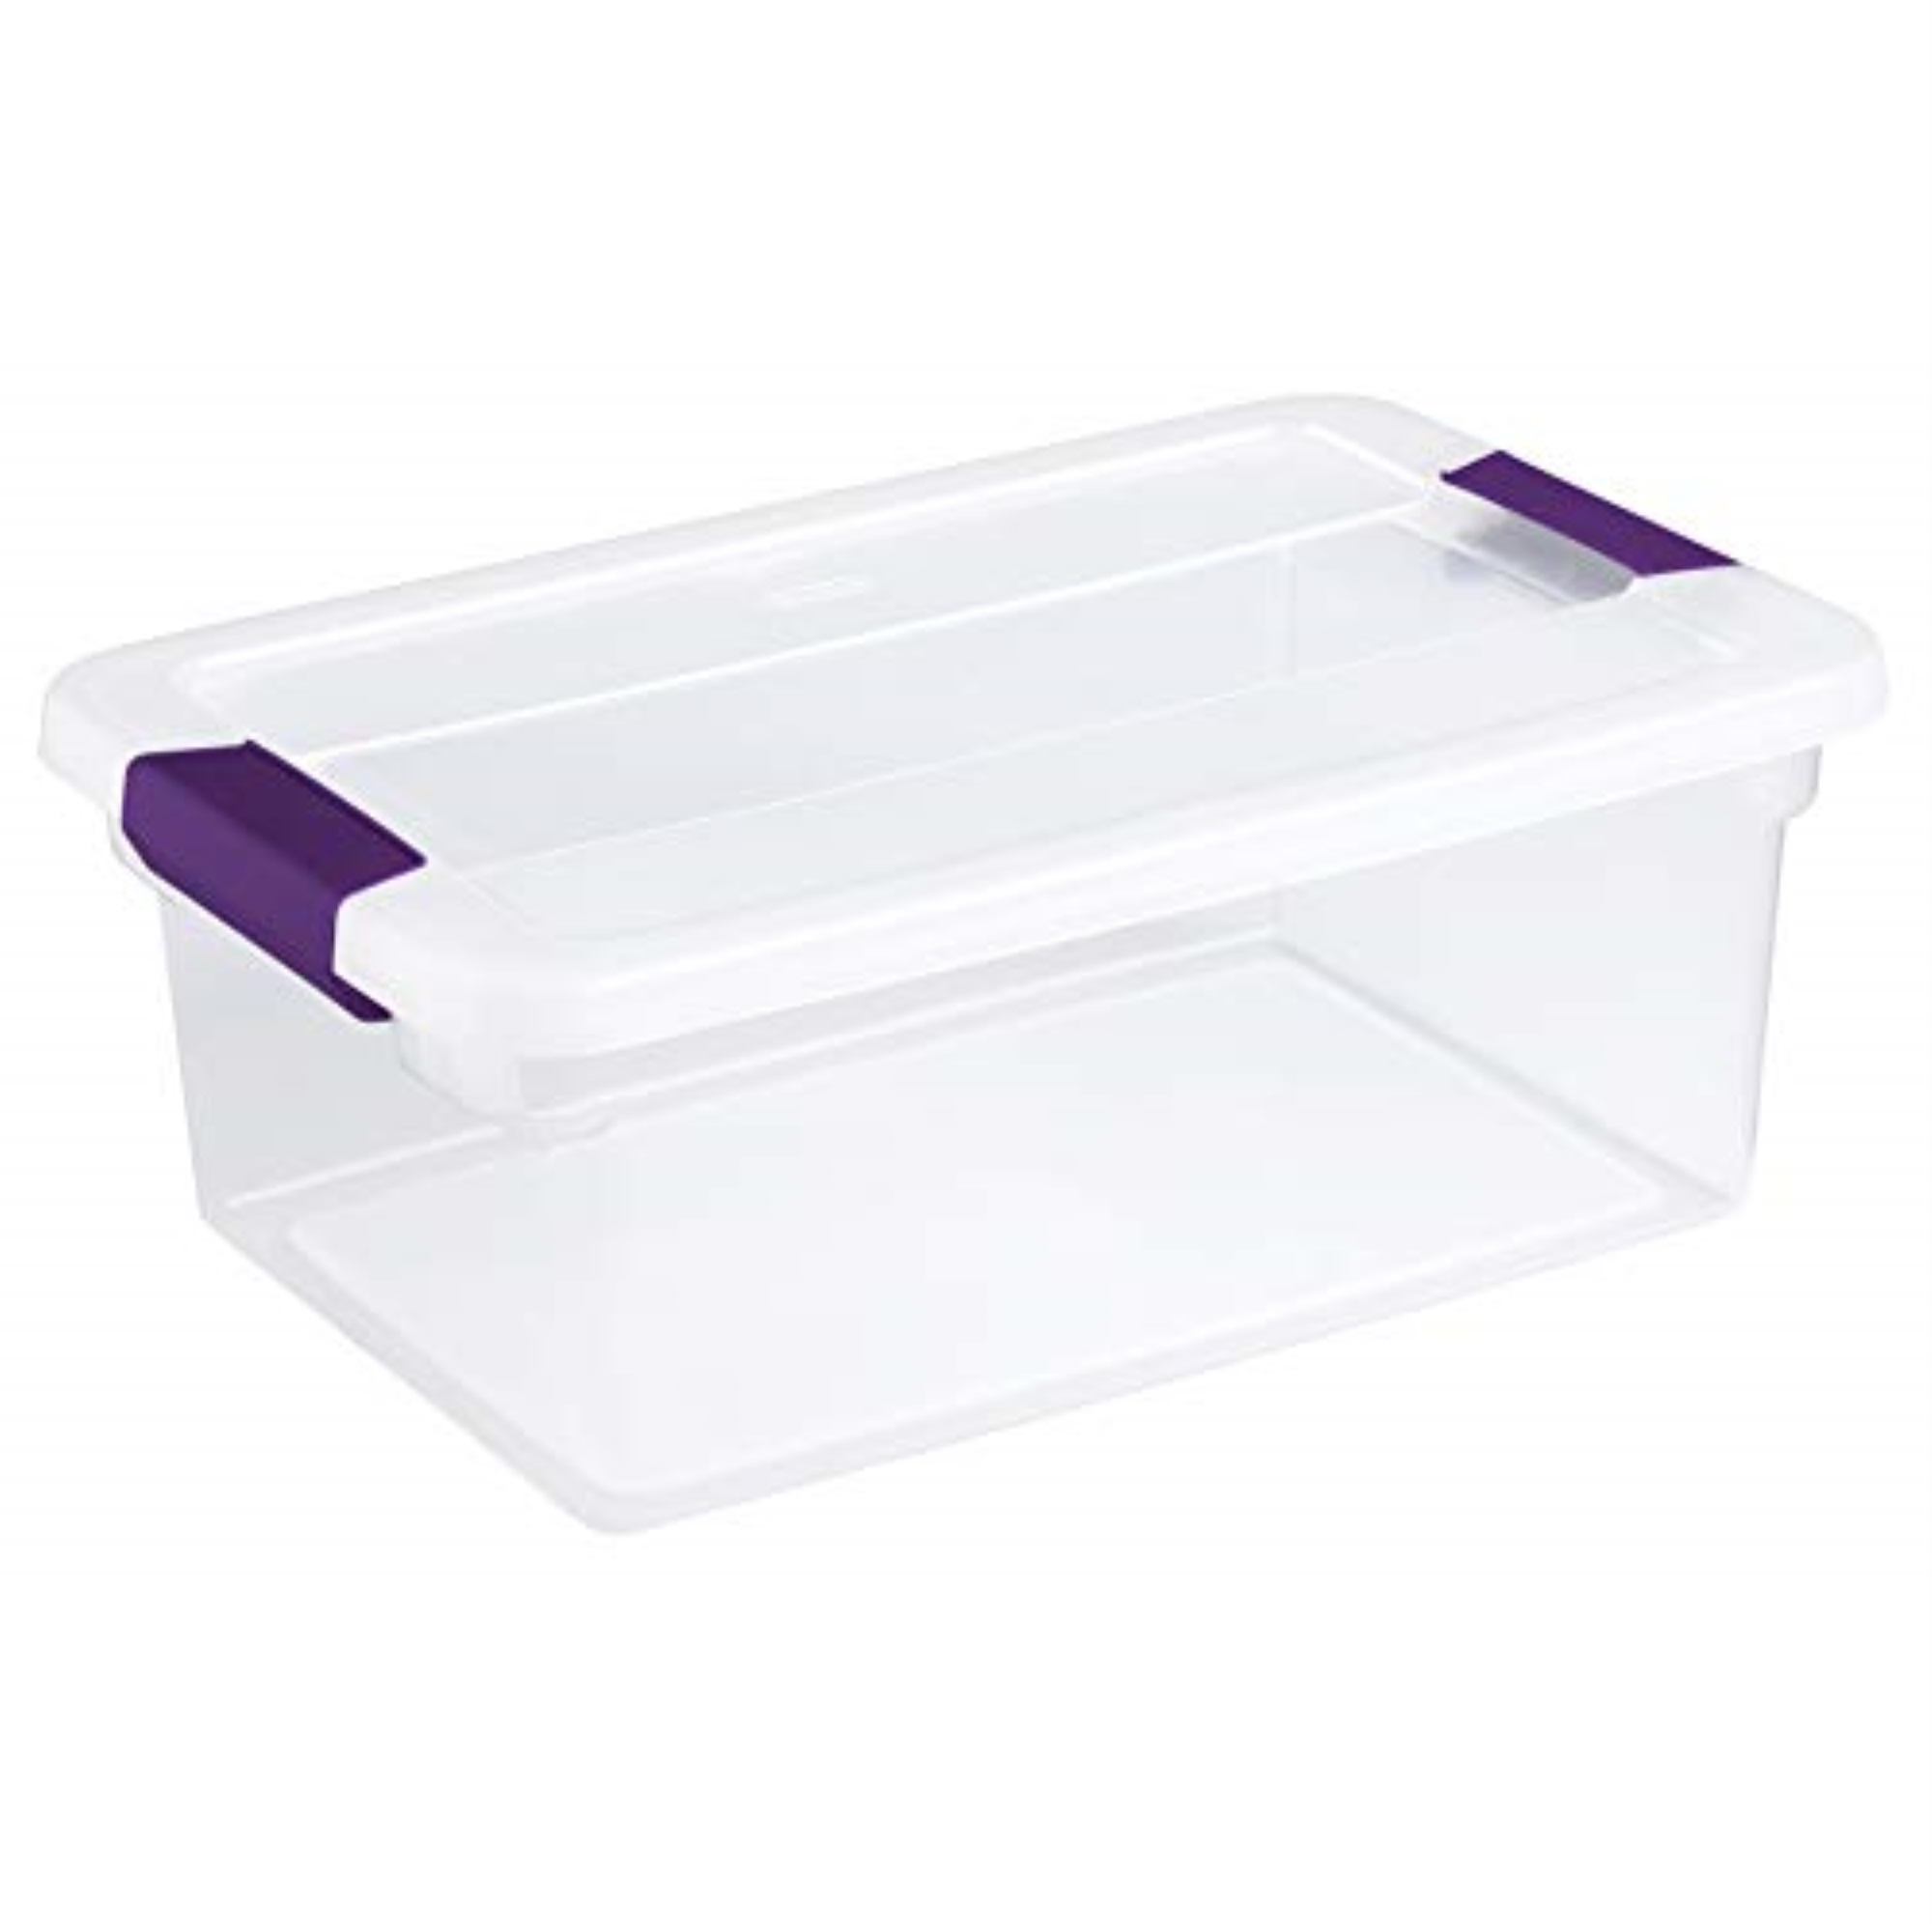 Sterilite 17531712 15-Quart ClearView Latch Box Storage Tote Container (1) - image 1 of 6